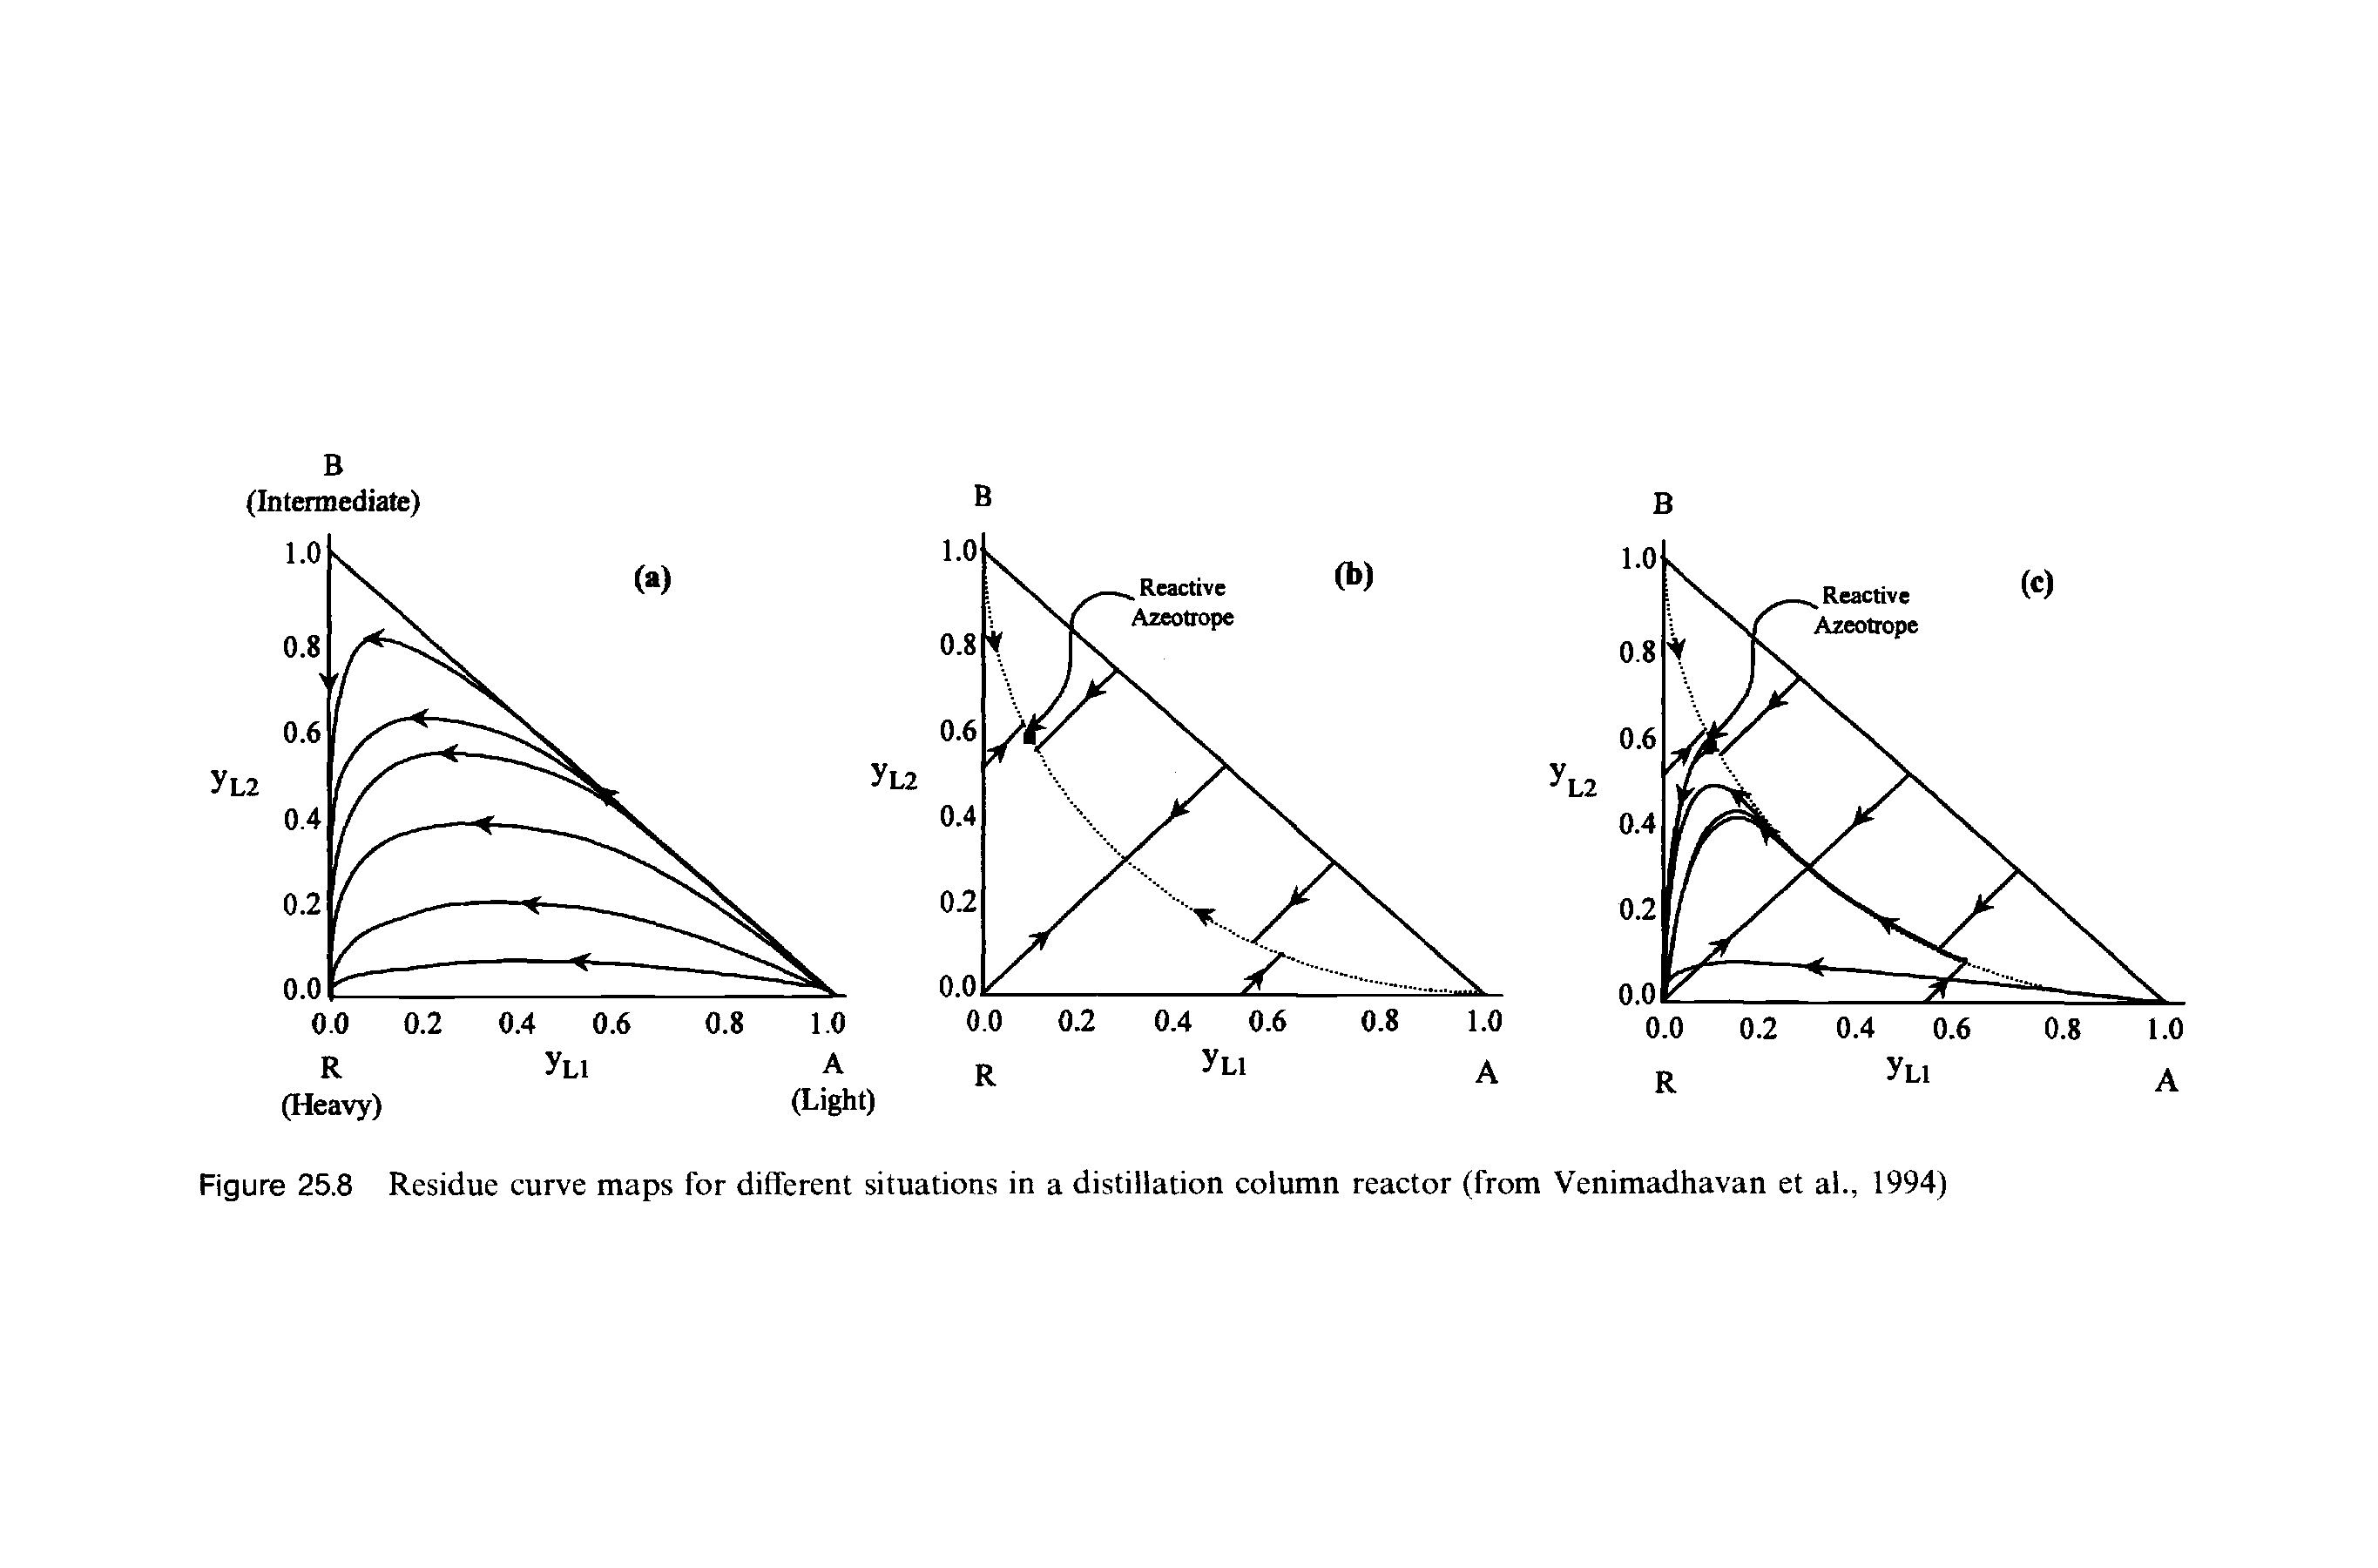 Figure 25.8 Residue curve maps for different situations in a distillation column reactor (from Venimadhavan et al., 1994)...